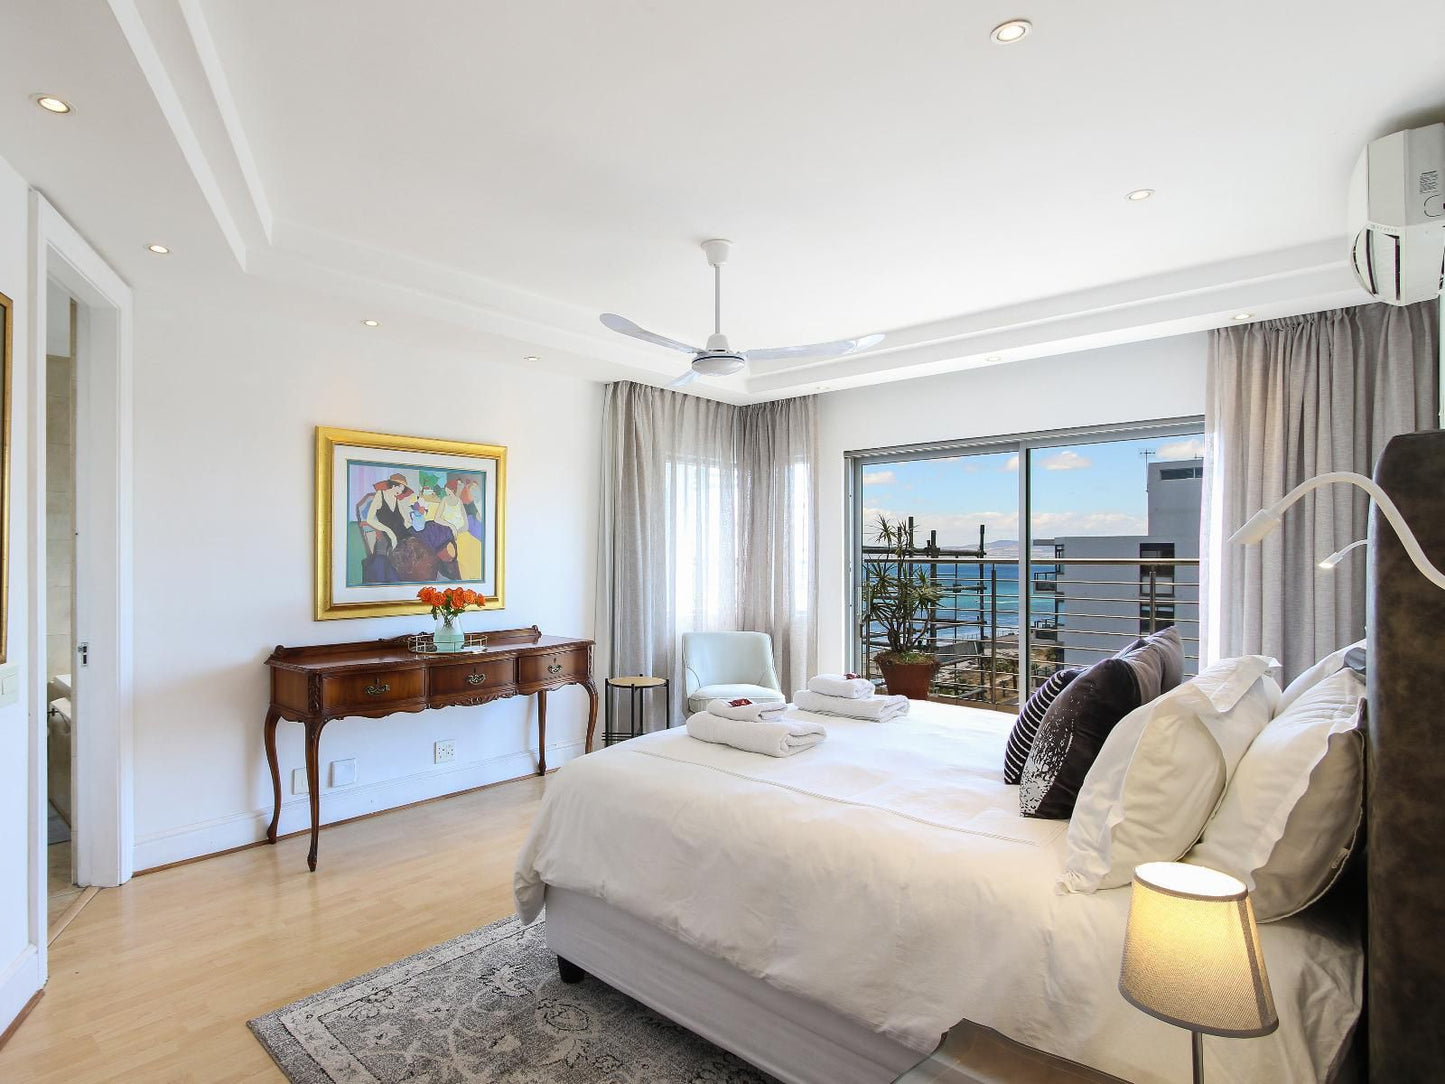 Viewpoint Mouille Point Cape Town Western Cape South Africa Bedroom